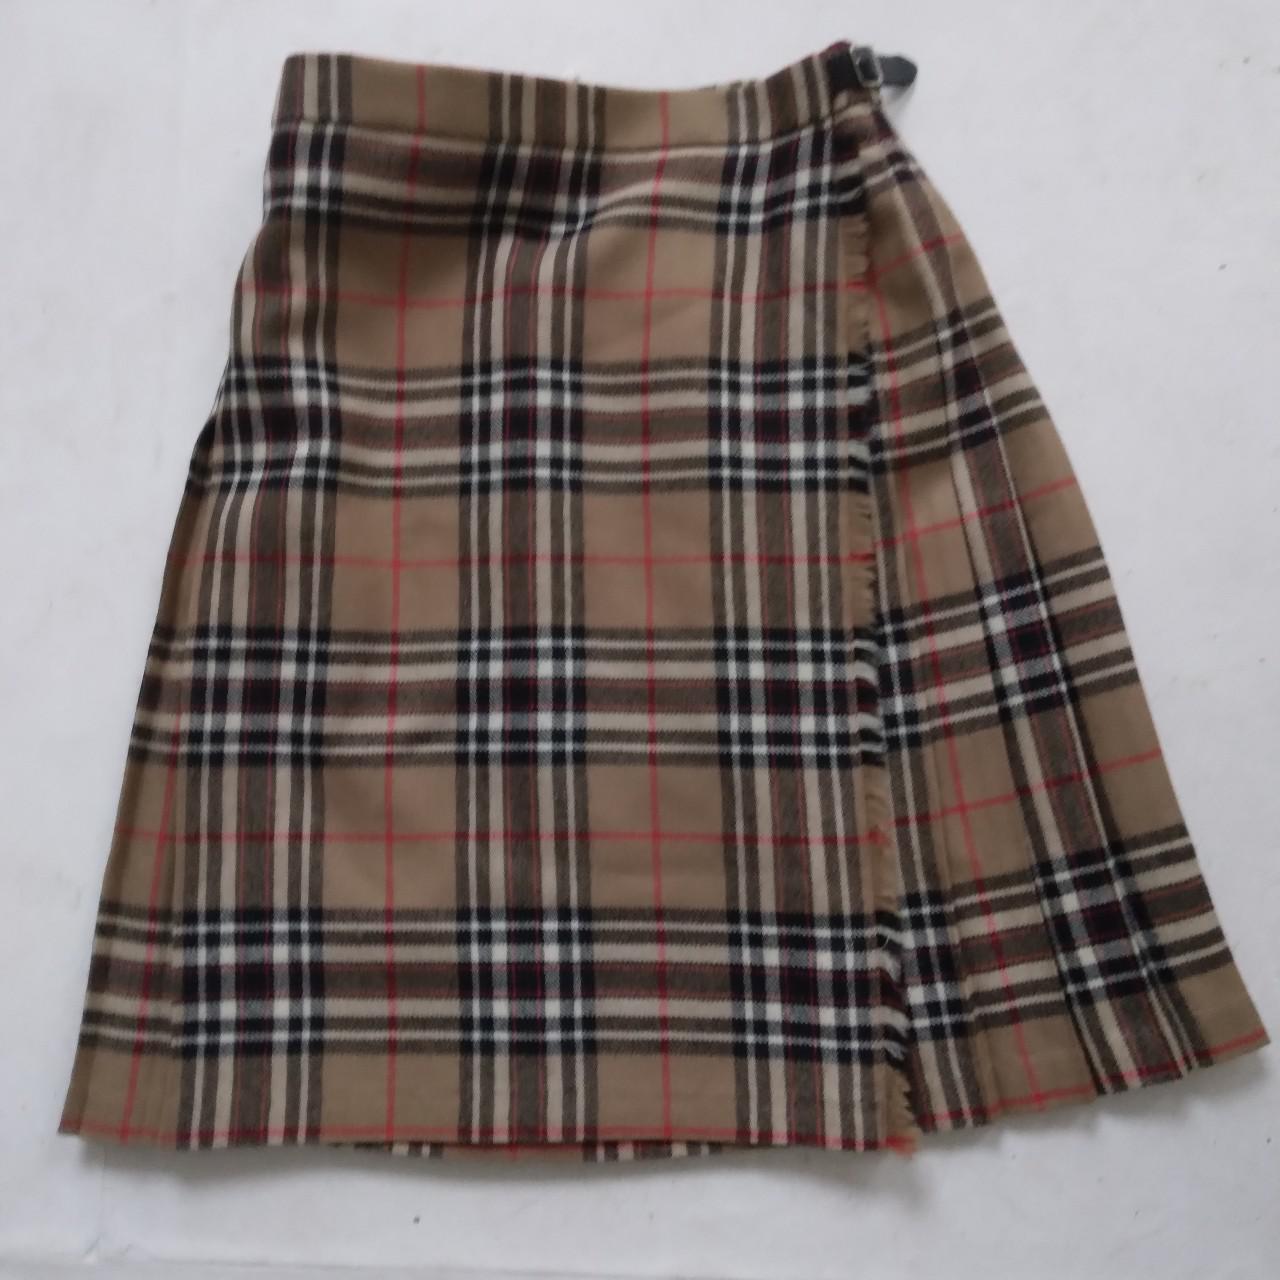 Product Image 1 - Vintage Chequered Skirt in kitchen